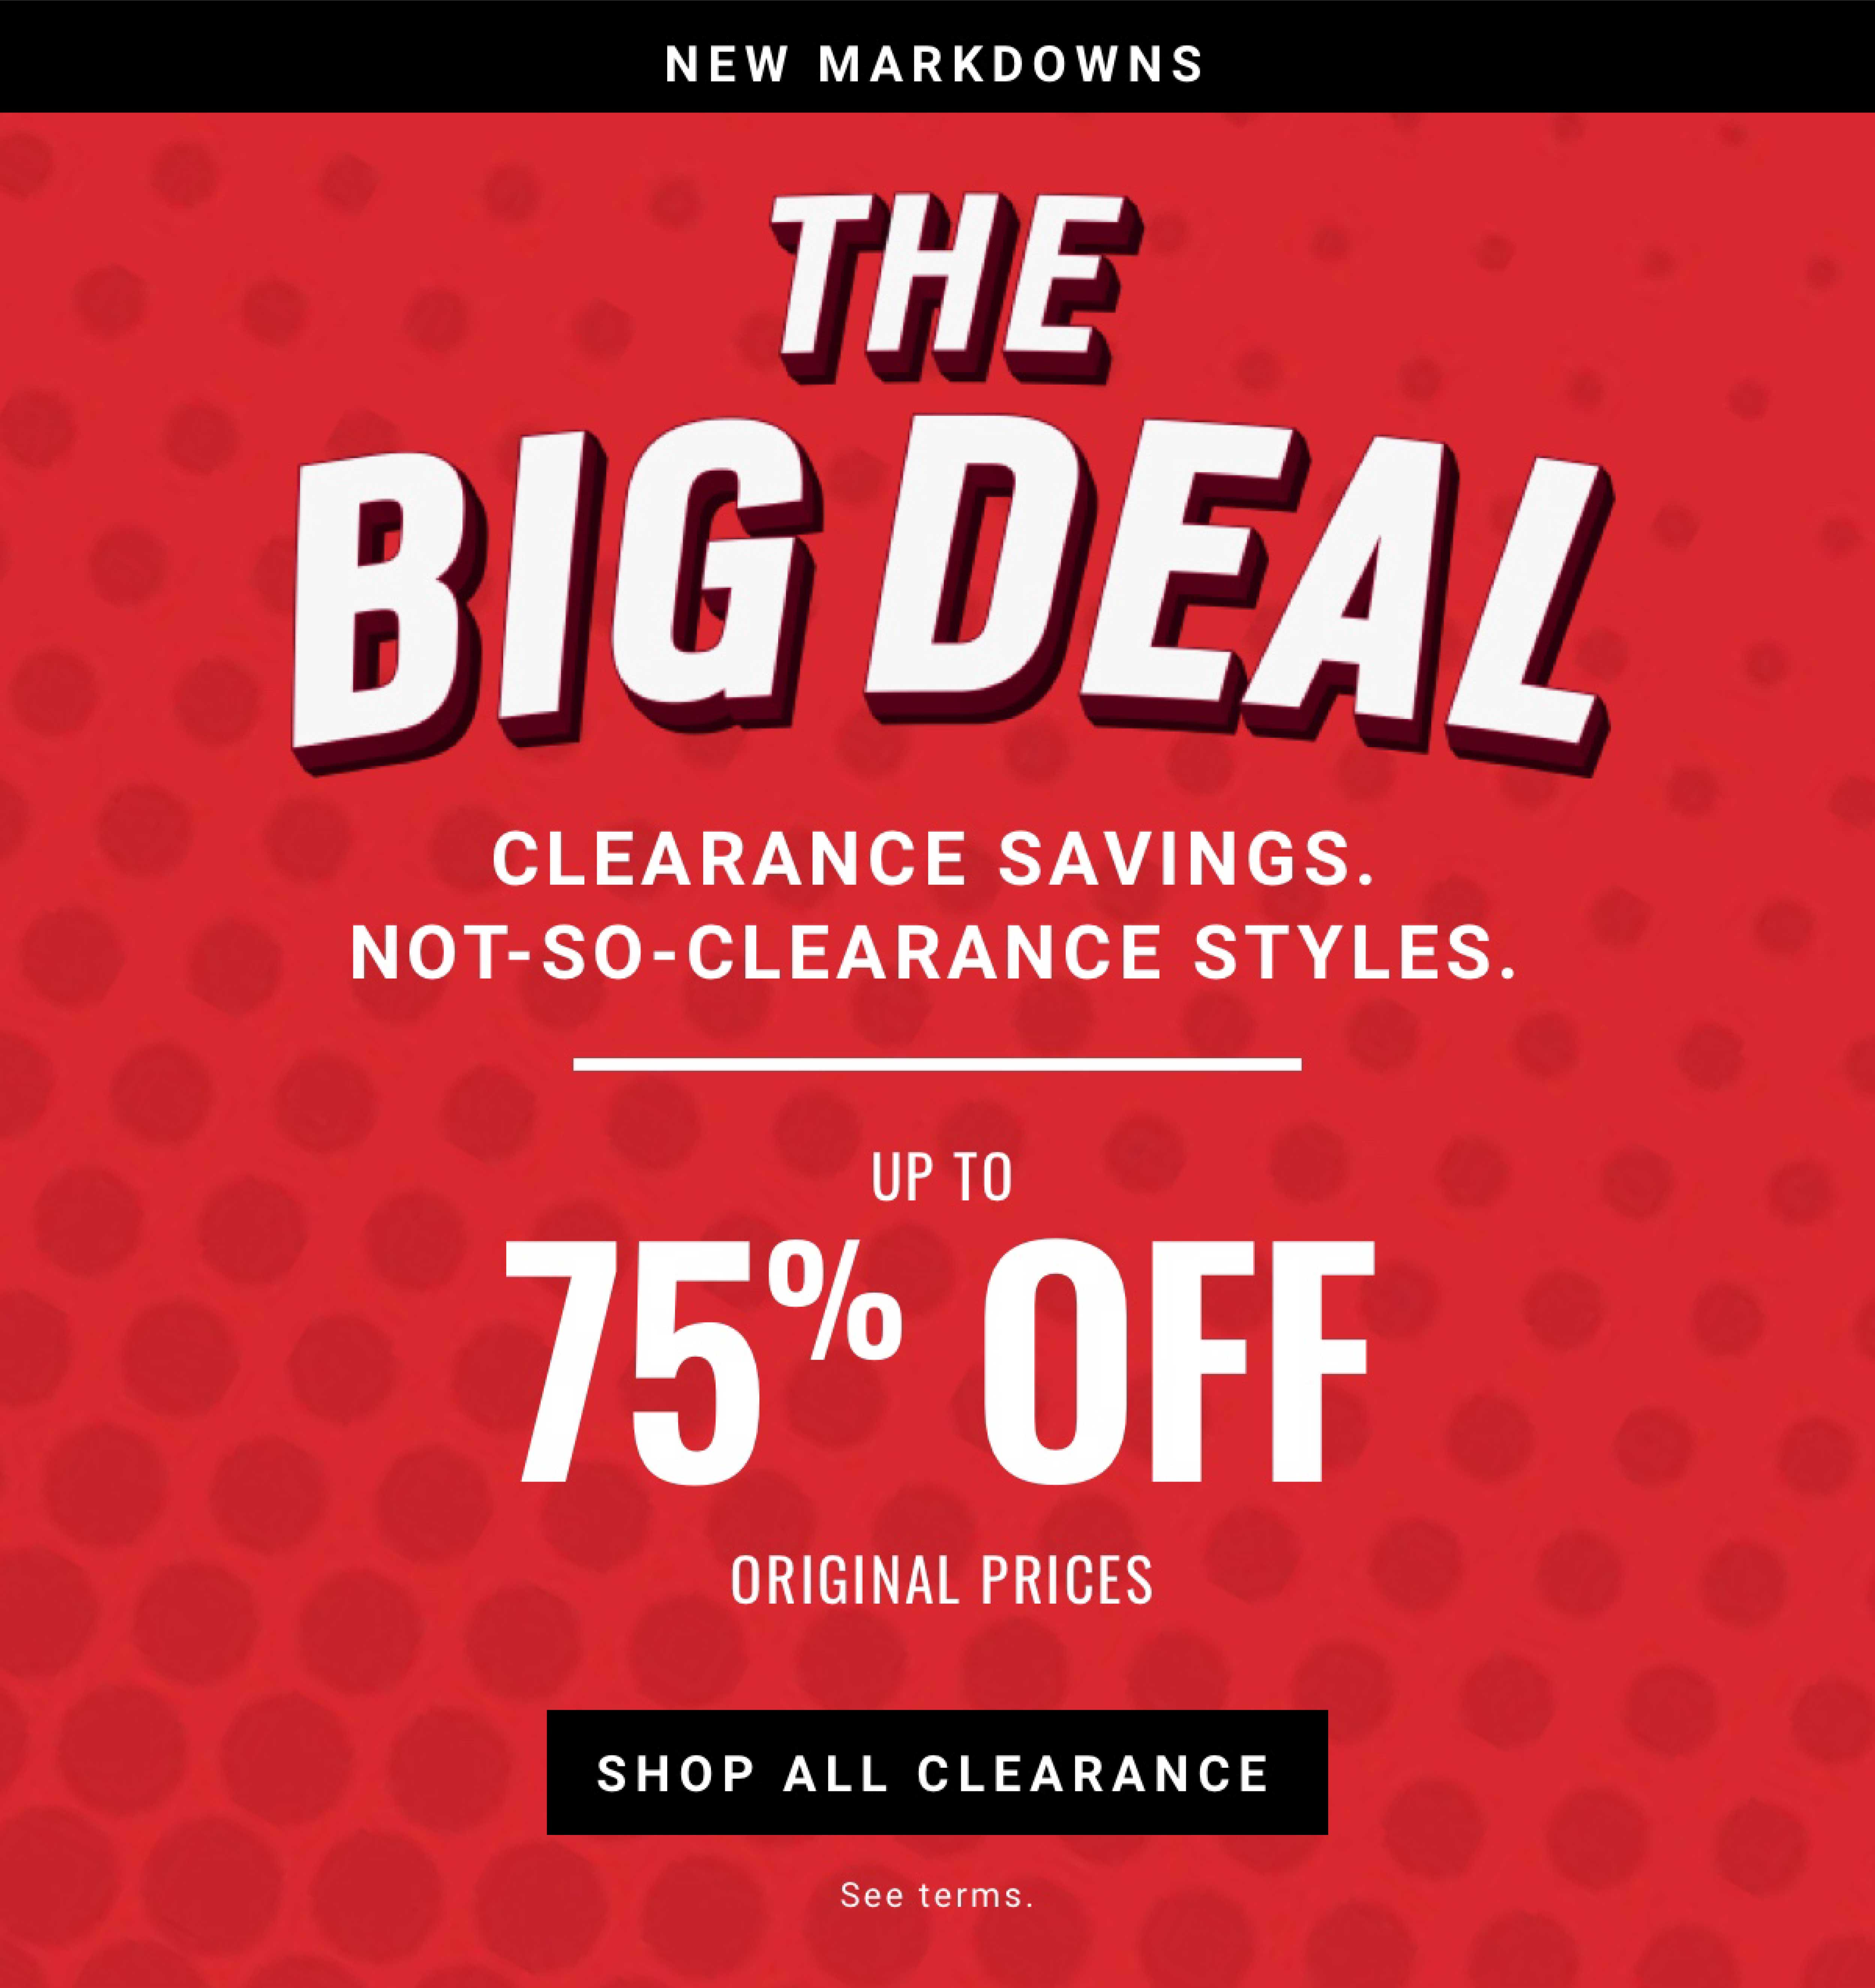 Big Deal Clearance 75% Off